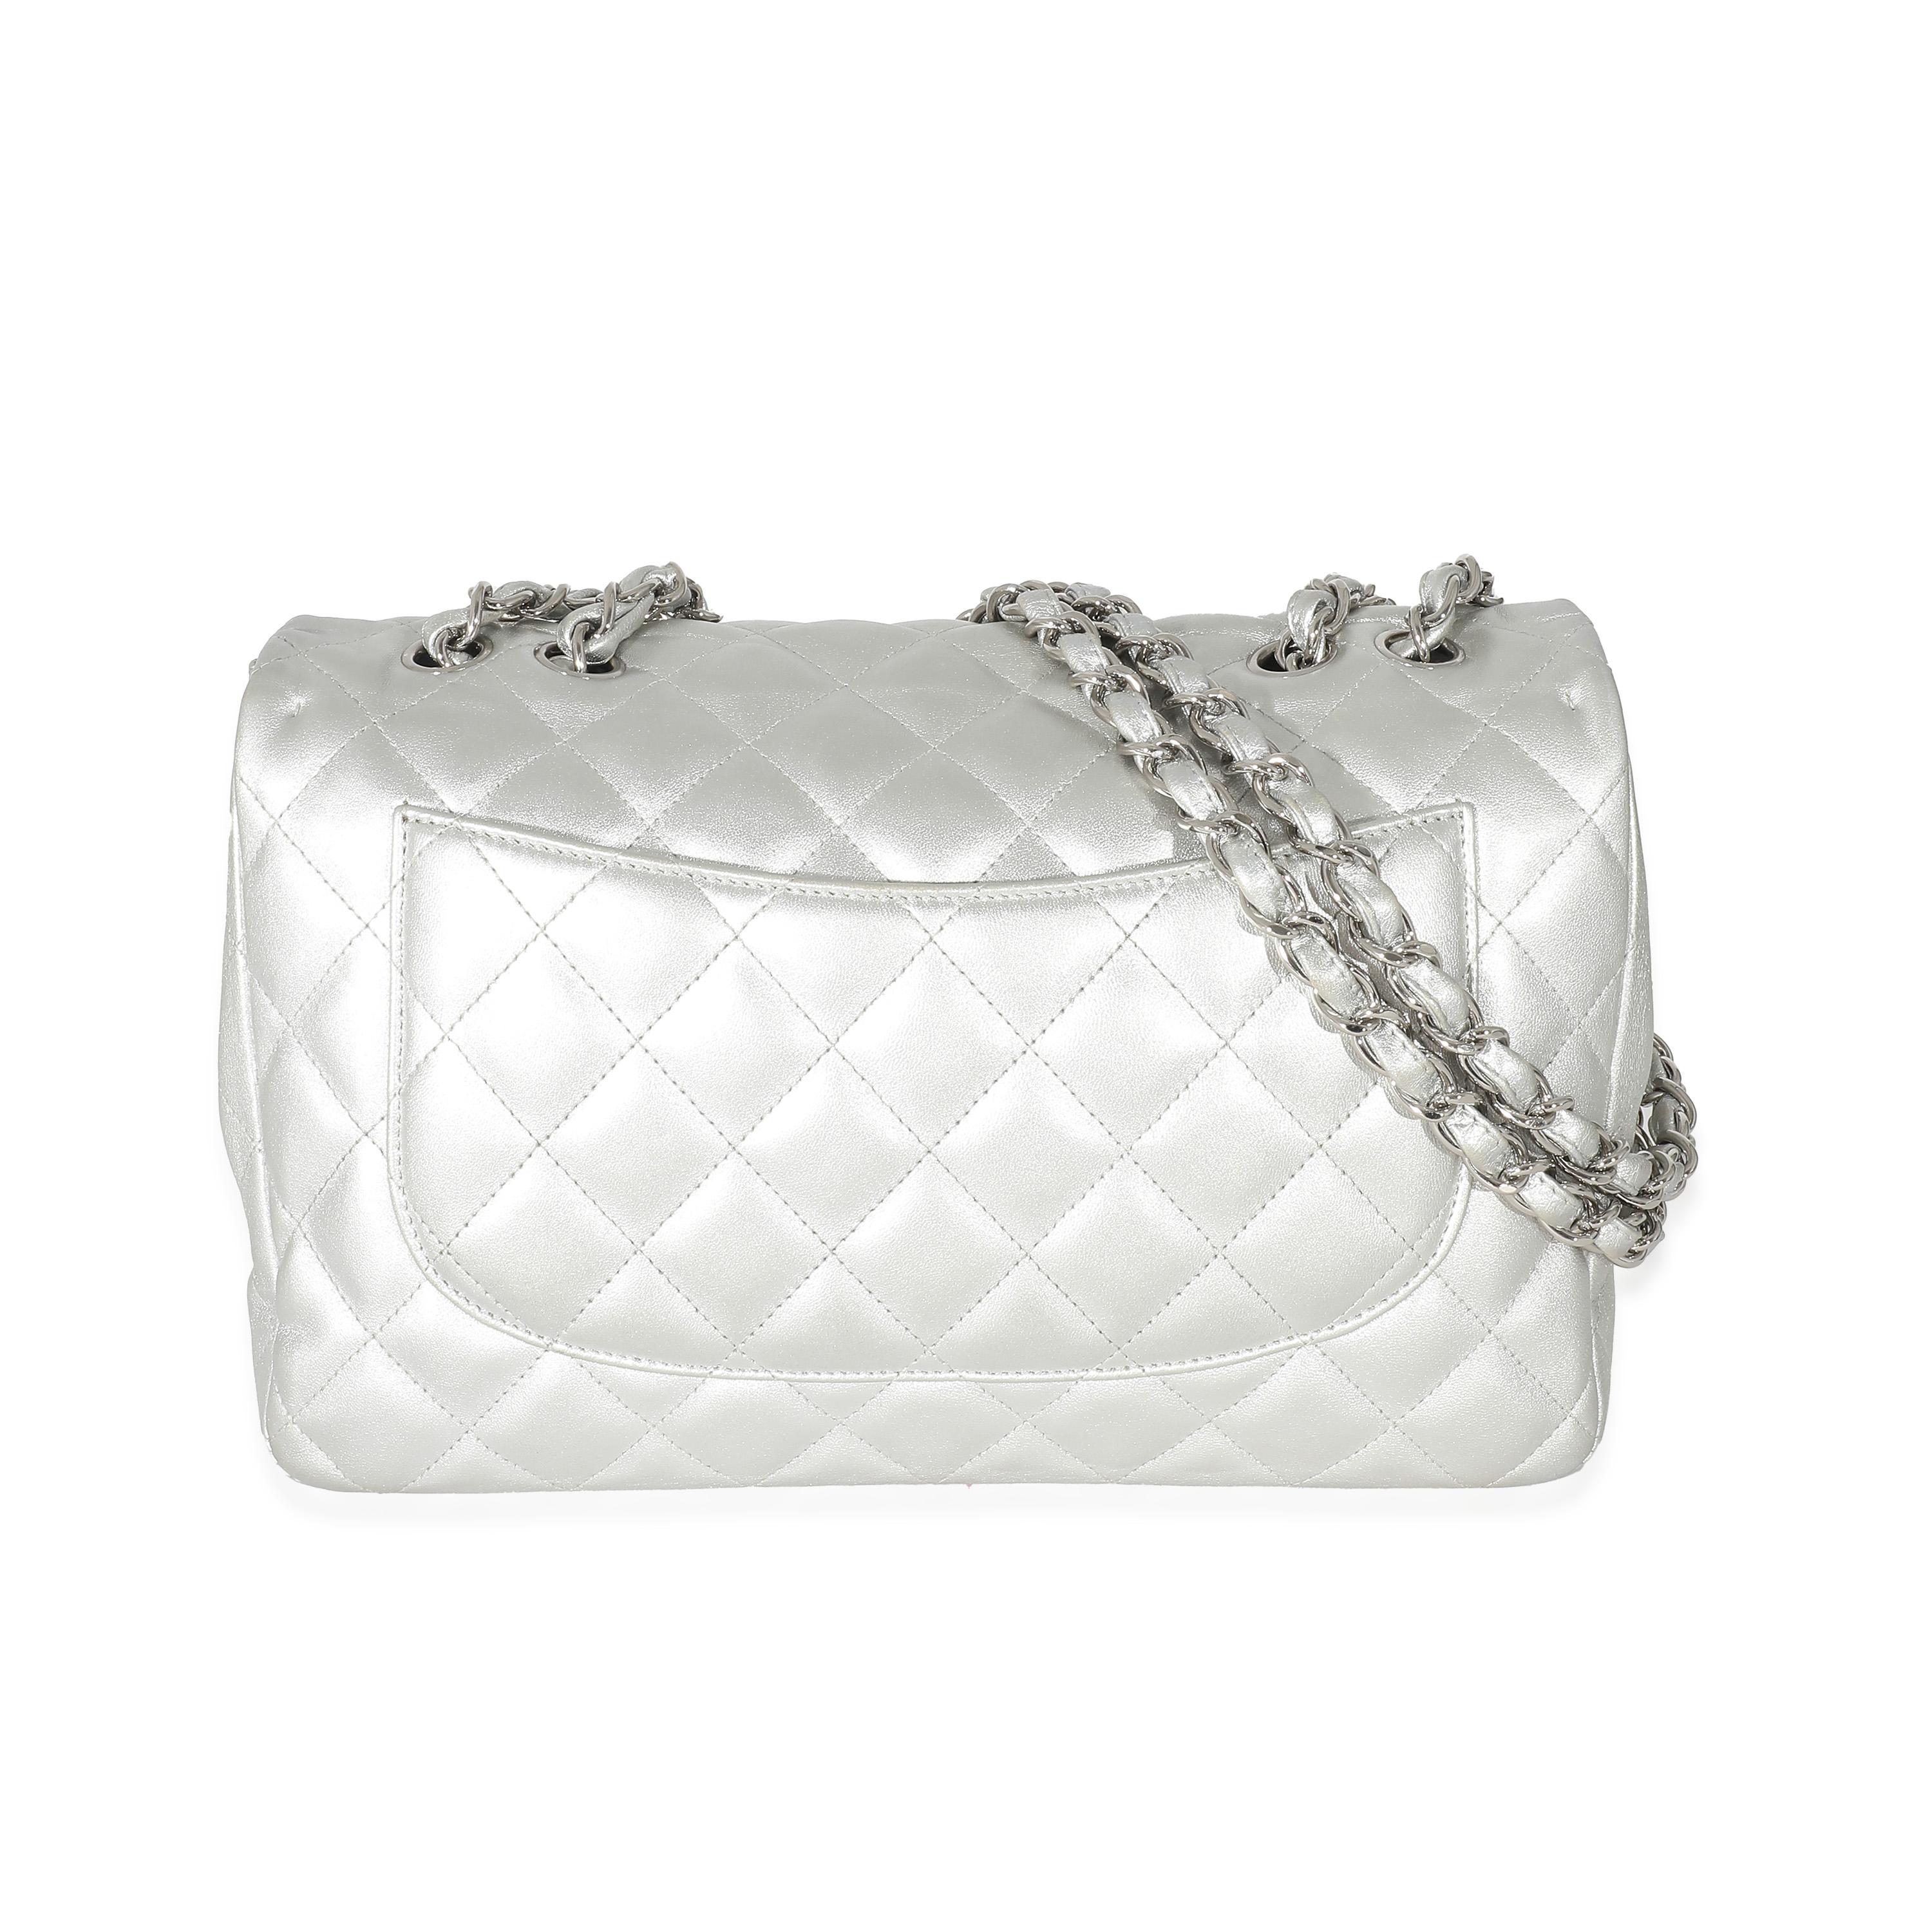 Listing Title: Chanel Silver Metallic Lambskin Jumbo Single Flap Bag
SKU: 133747
Condition: Pre-owned 
Condition Description: A timeless classic that never goes out of style, the flap bag from Chanel dates back to 1955 and has seen a number of